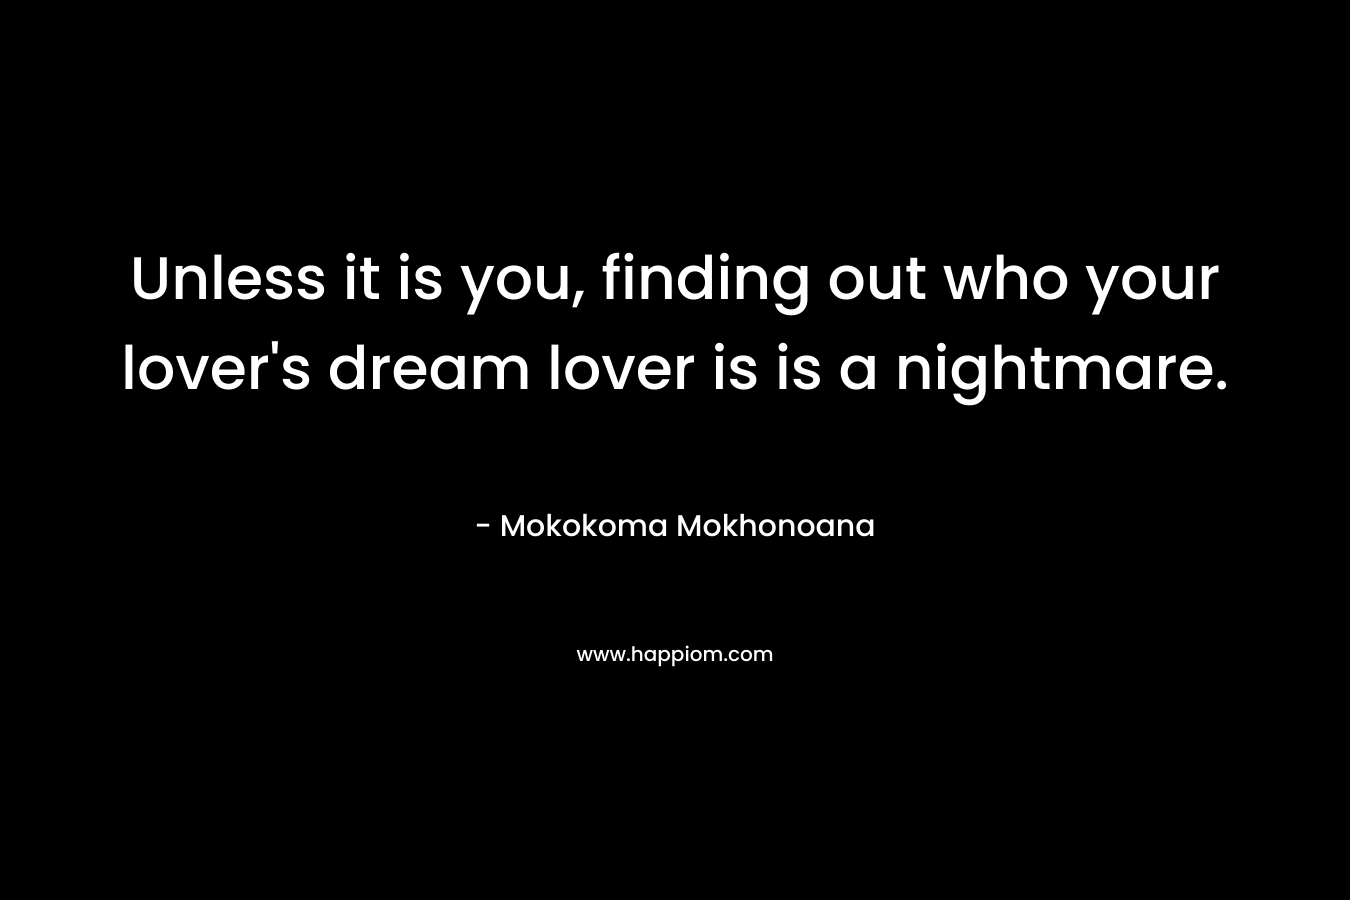 Unless it is you, finding out who your lover's dream lover is is a nightmare.